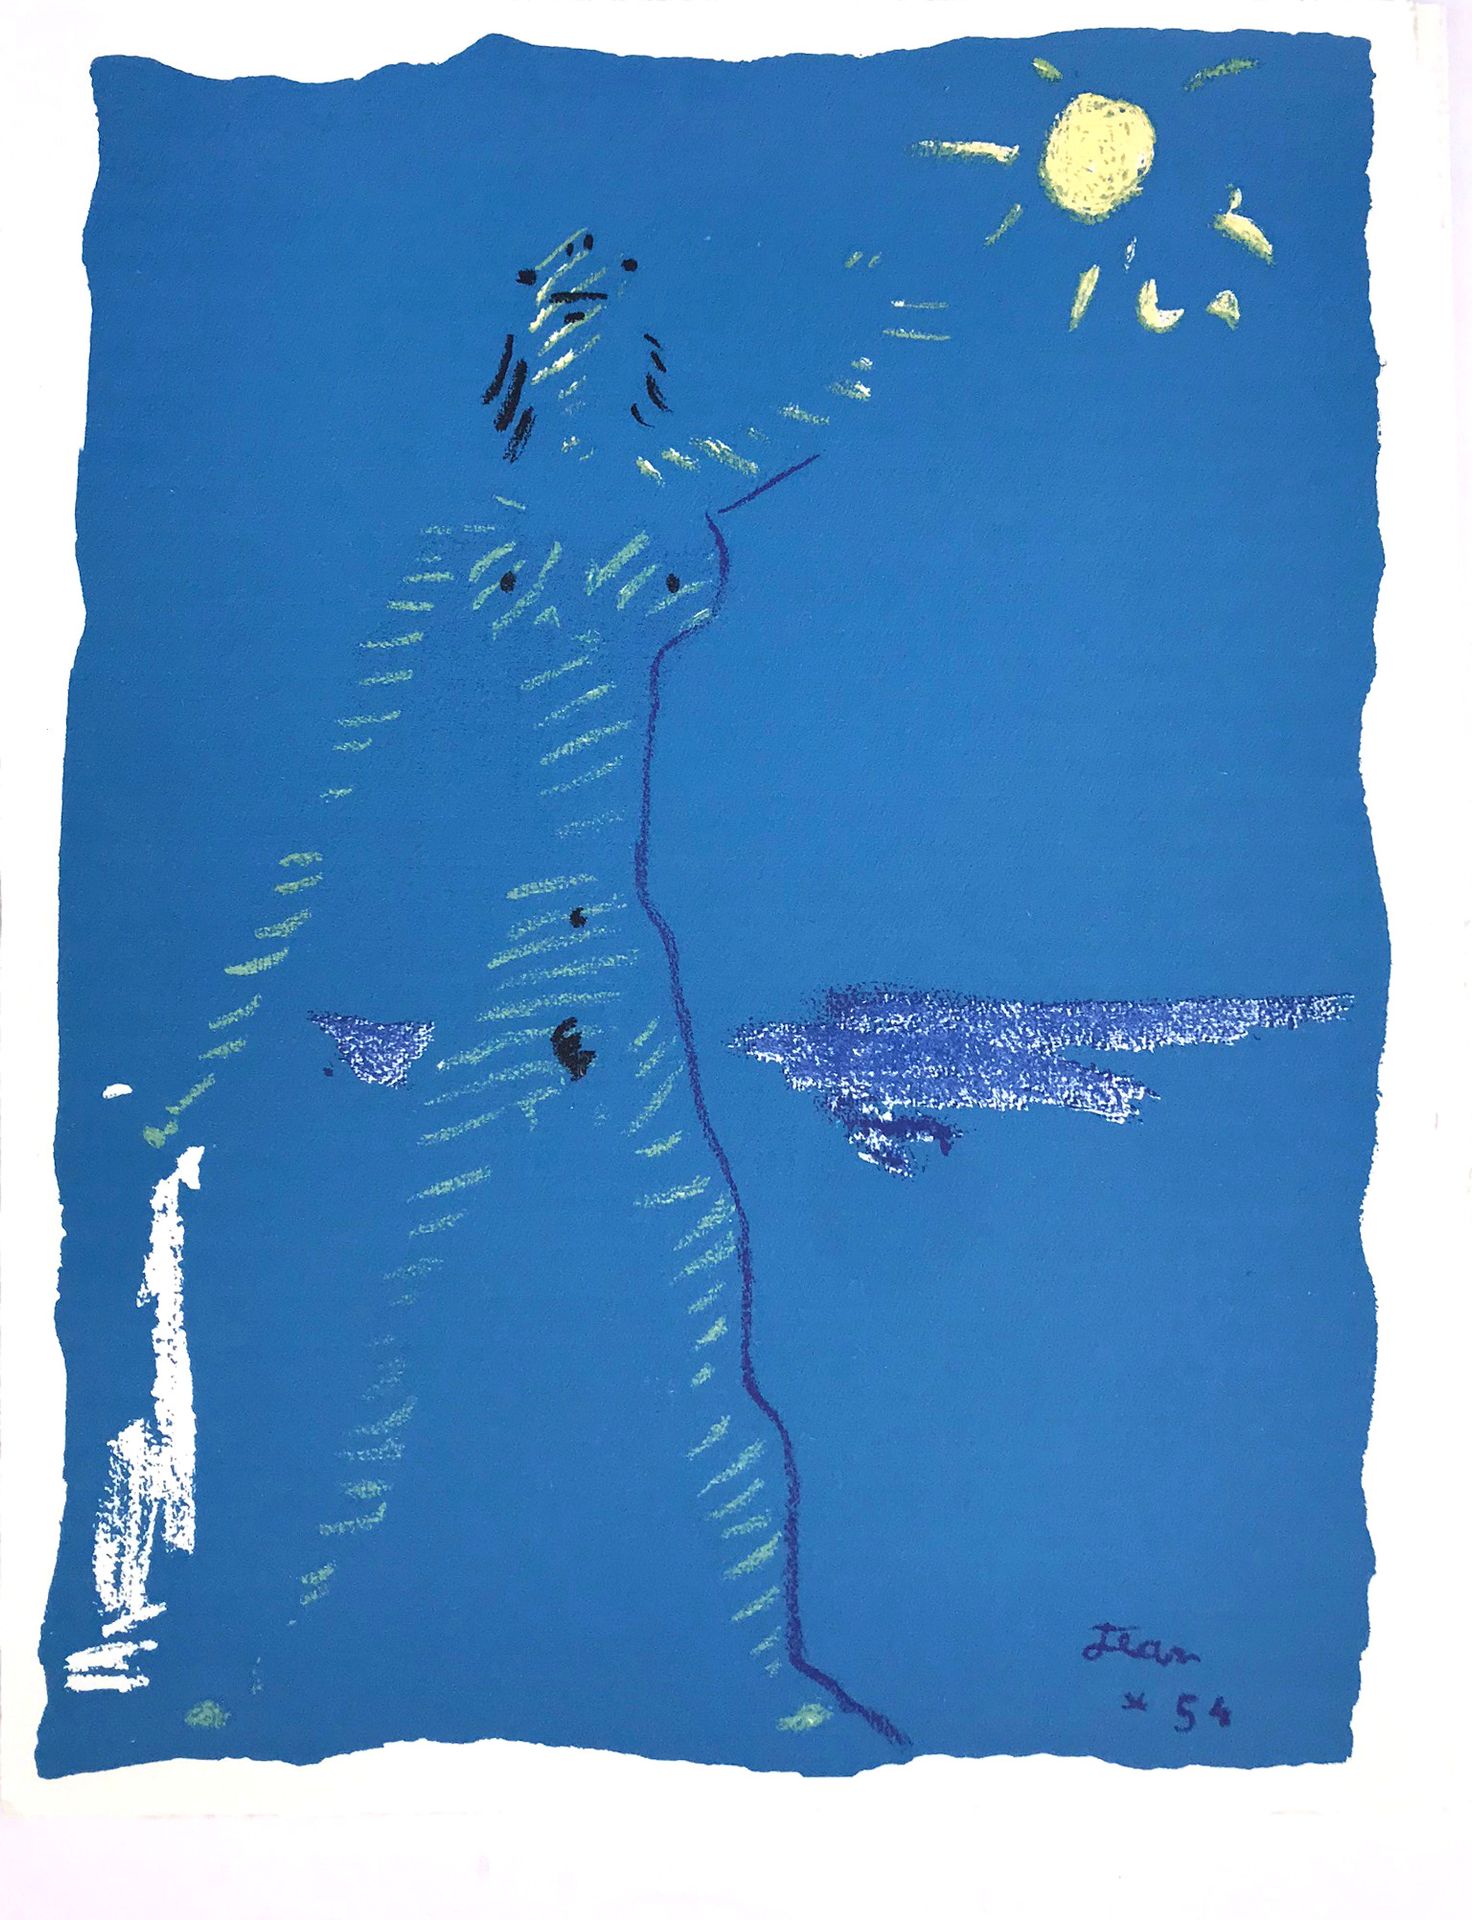 JEAN COCTEAU Jean Cocteau

Nude woman at the beach, 1954

Lithograph

Signed in &hellip;